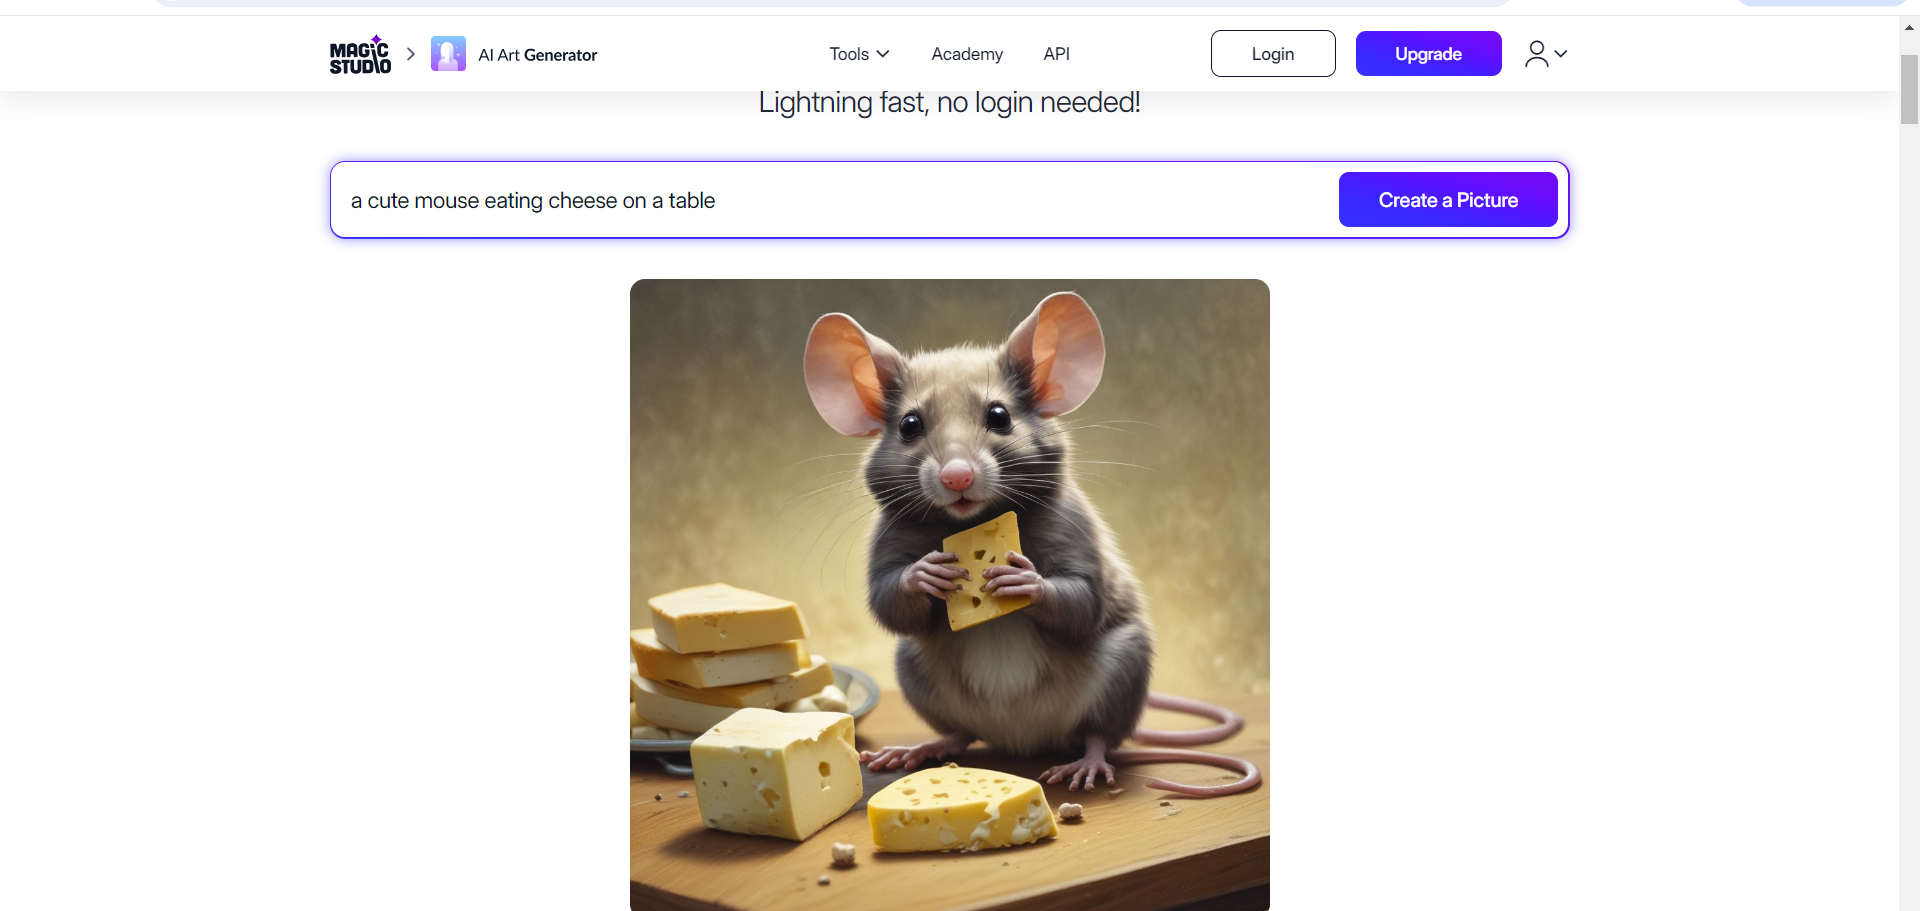 A picture of a mouse eating cheese while sitting on a table created by an AI art generator 